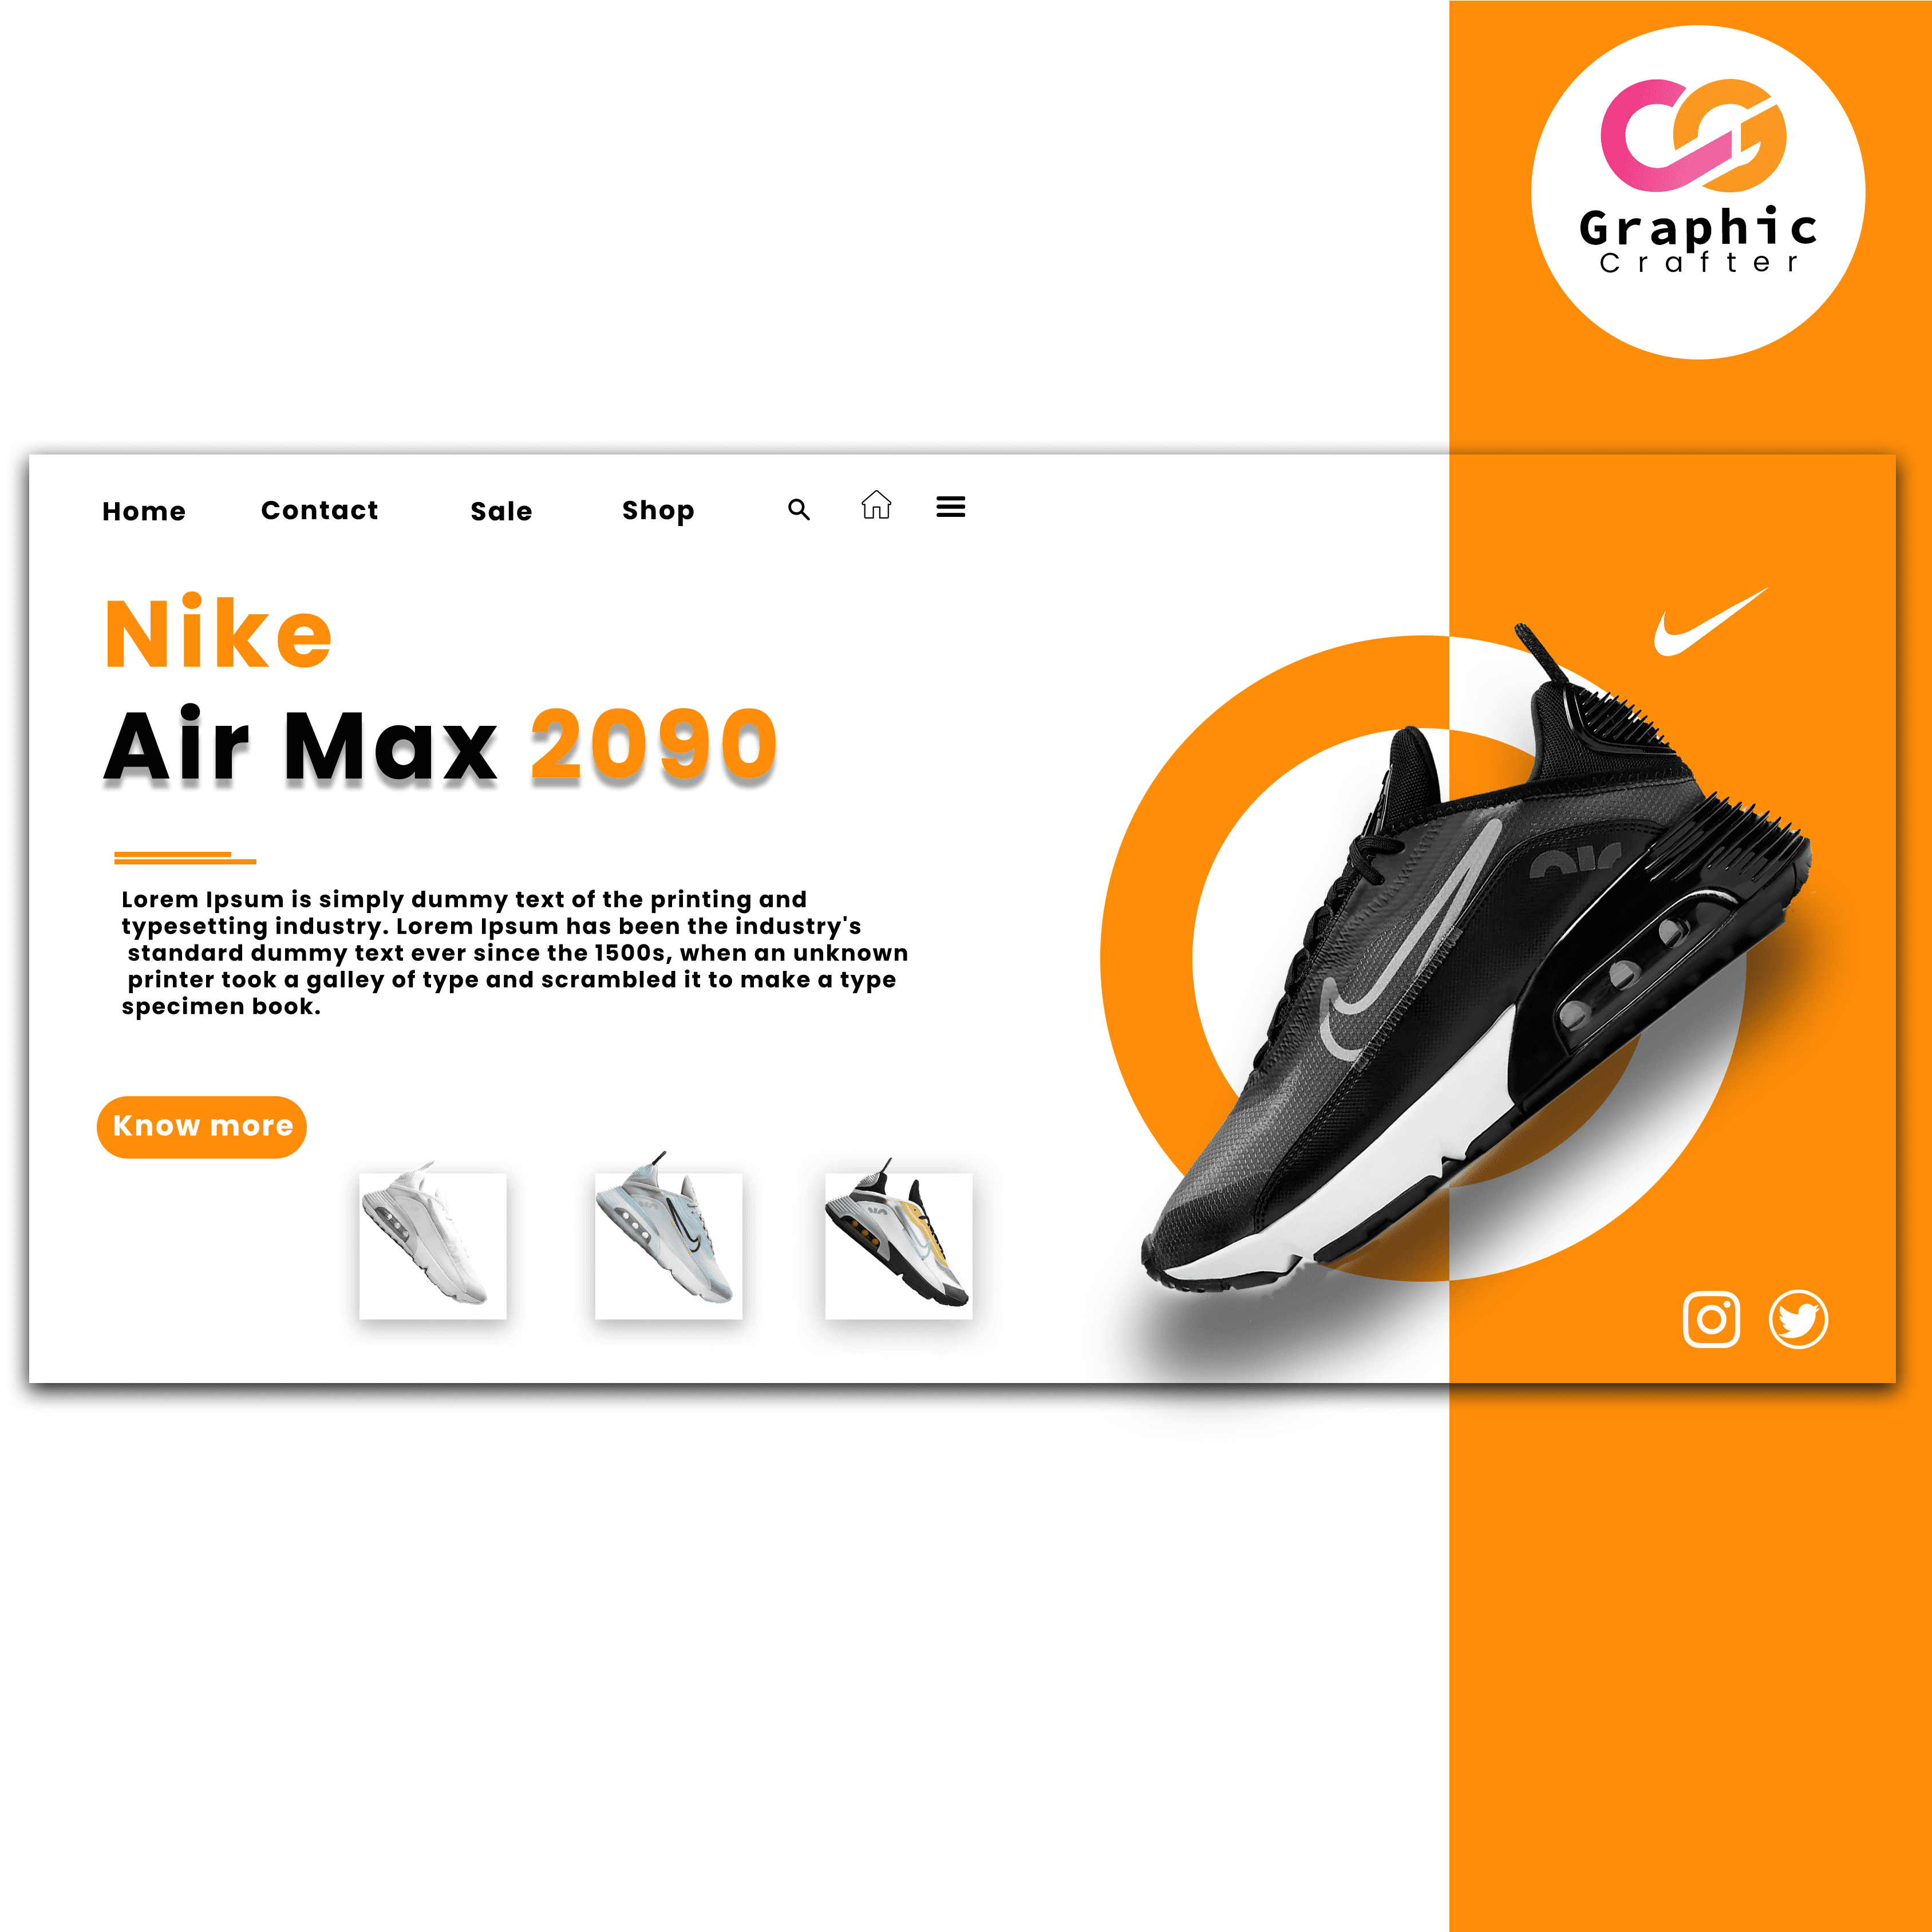 the ui design for your shoes product cover image.